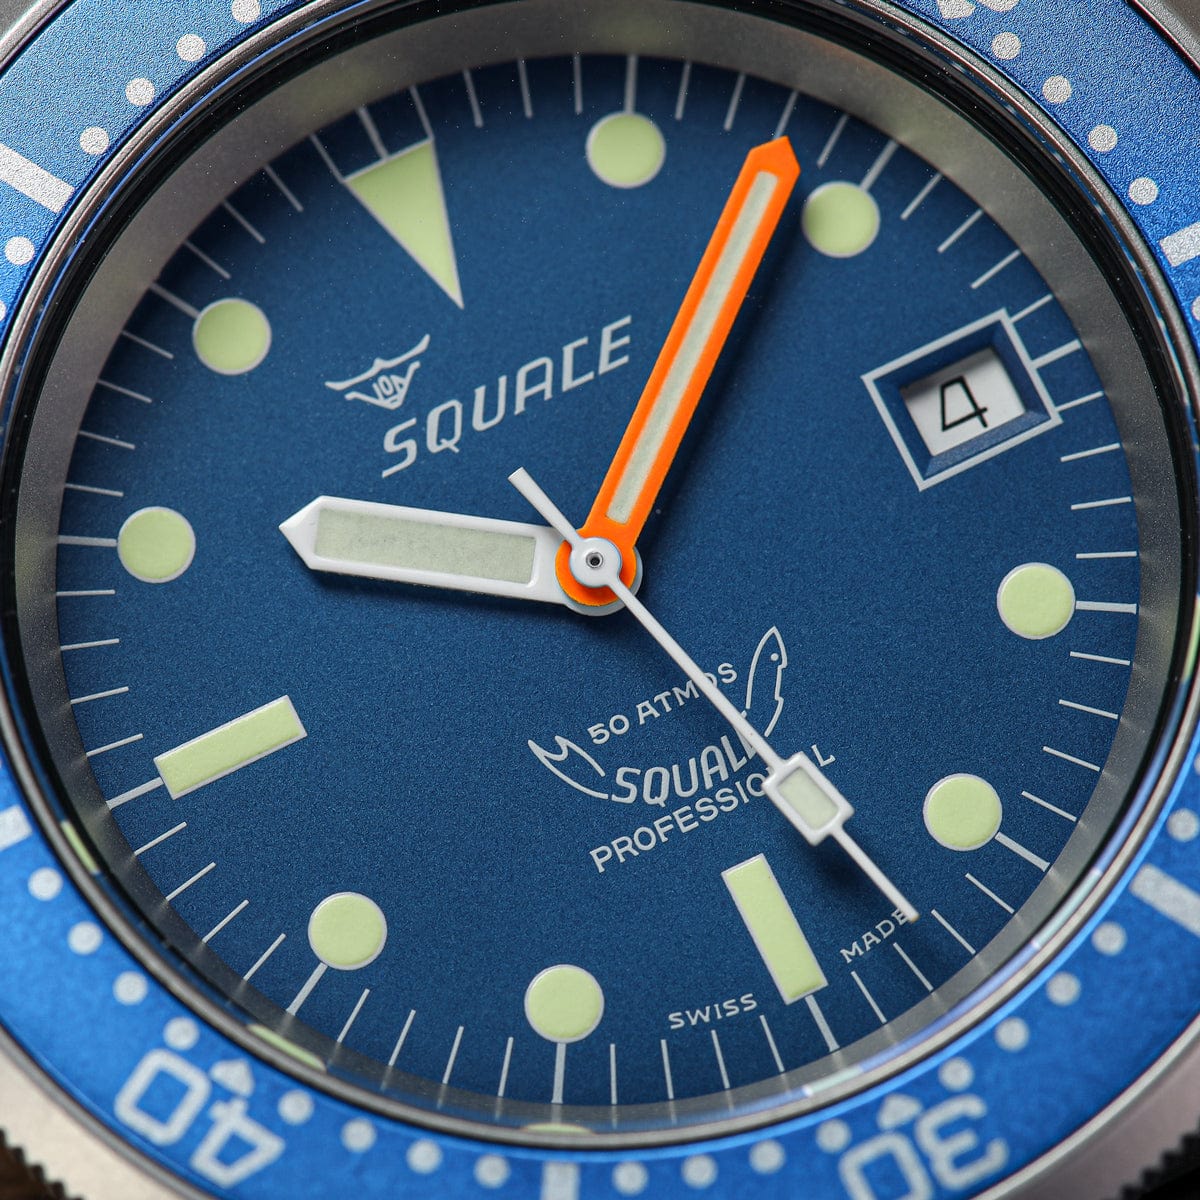 Squale 1521 Swiss Made Diver's Watch Blue Dial, Blasted Case - Rubber